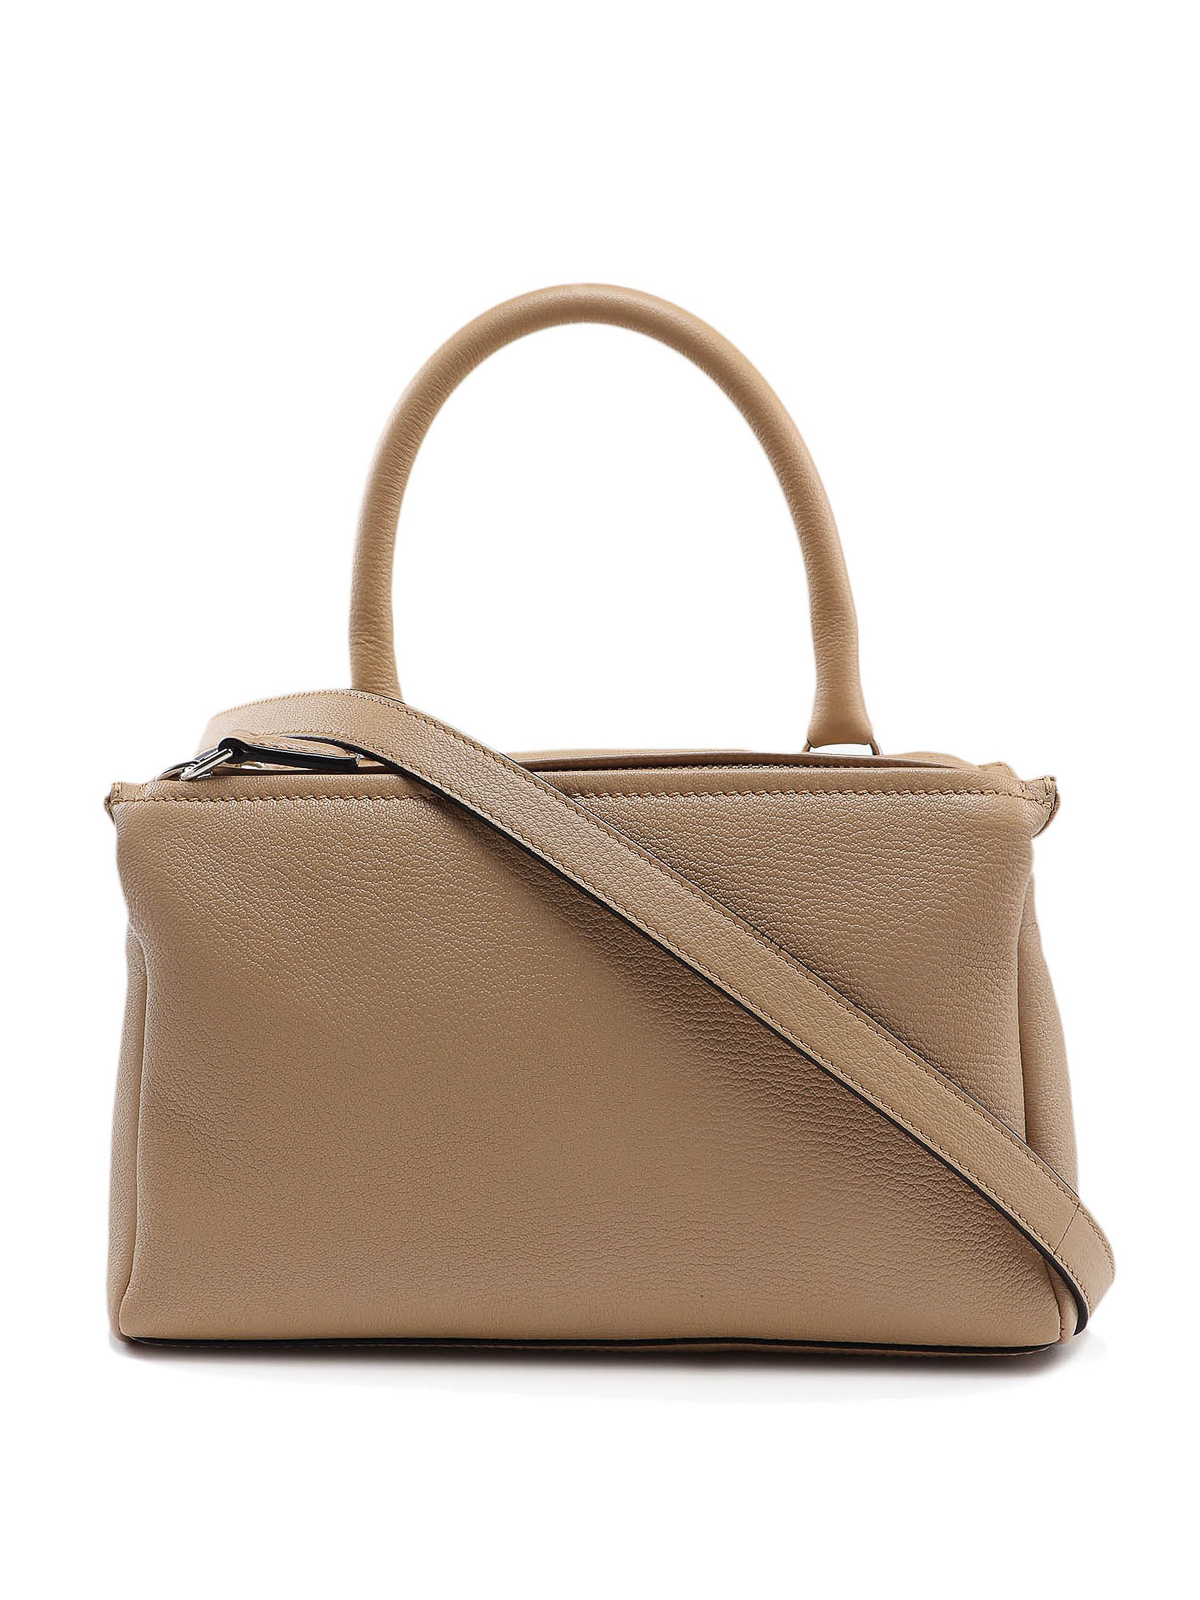 Givenchy Pandora Small Bag In Beige